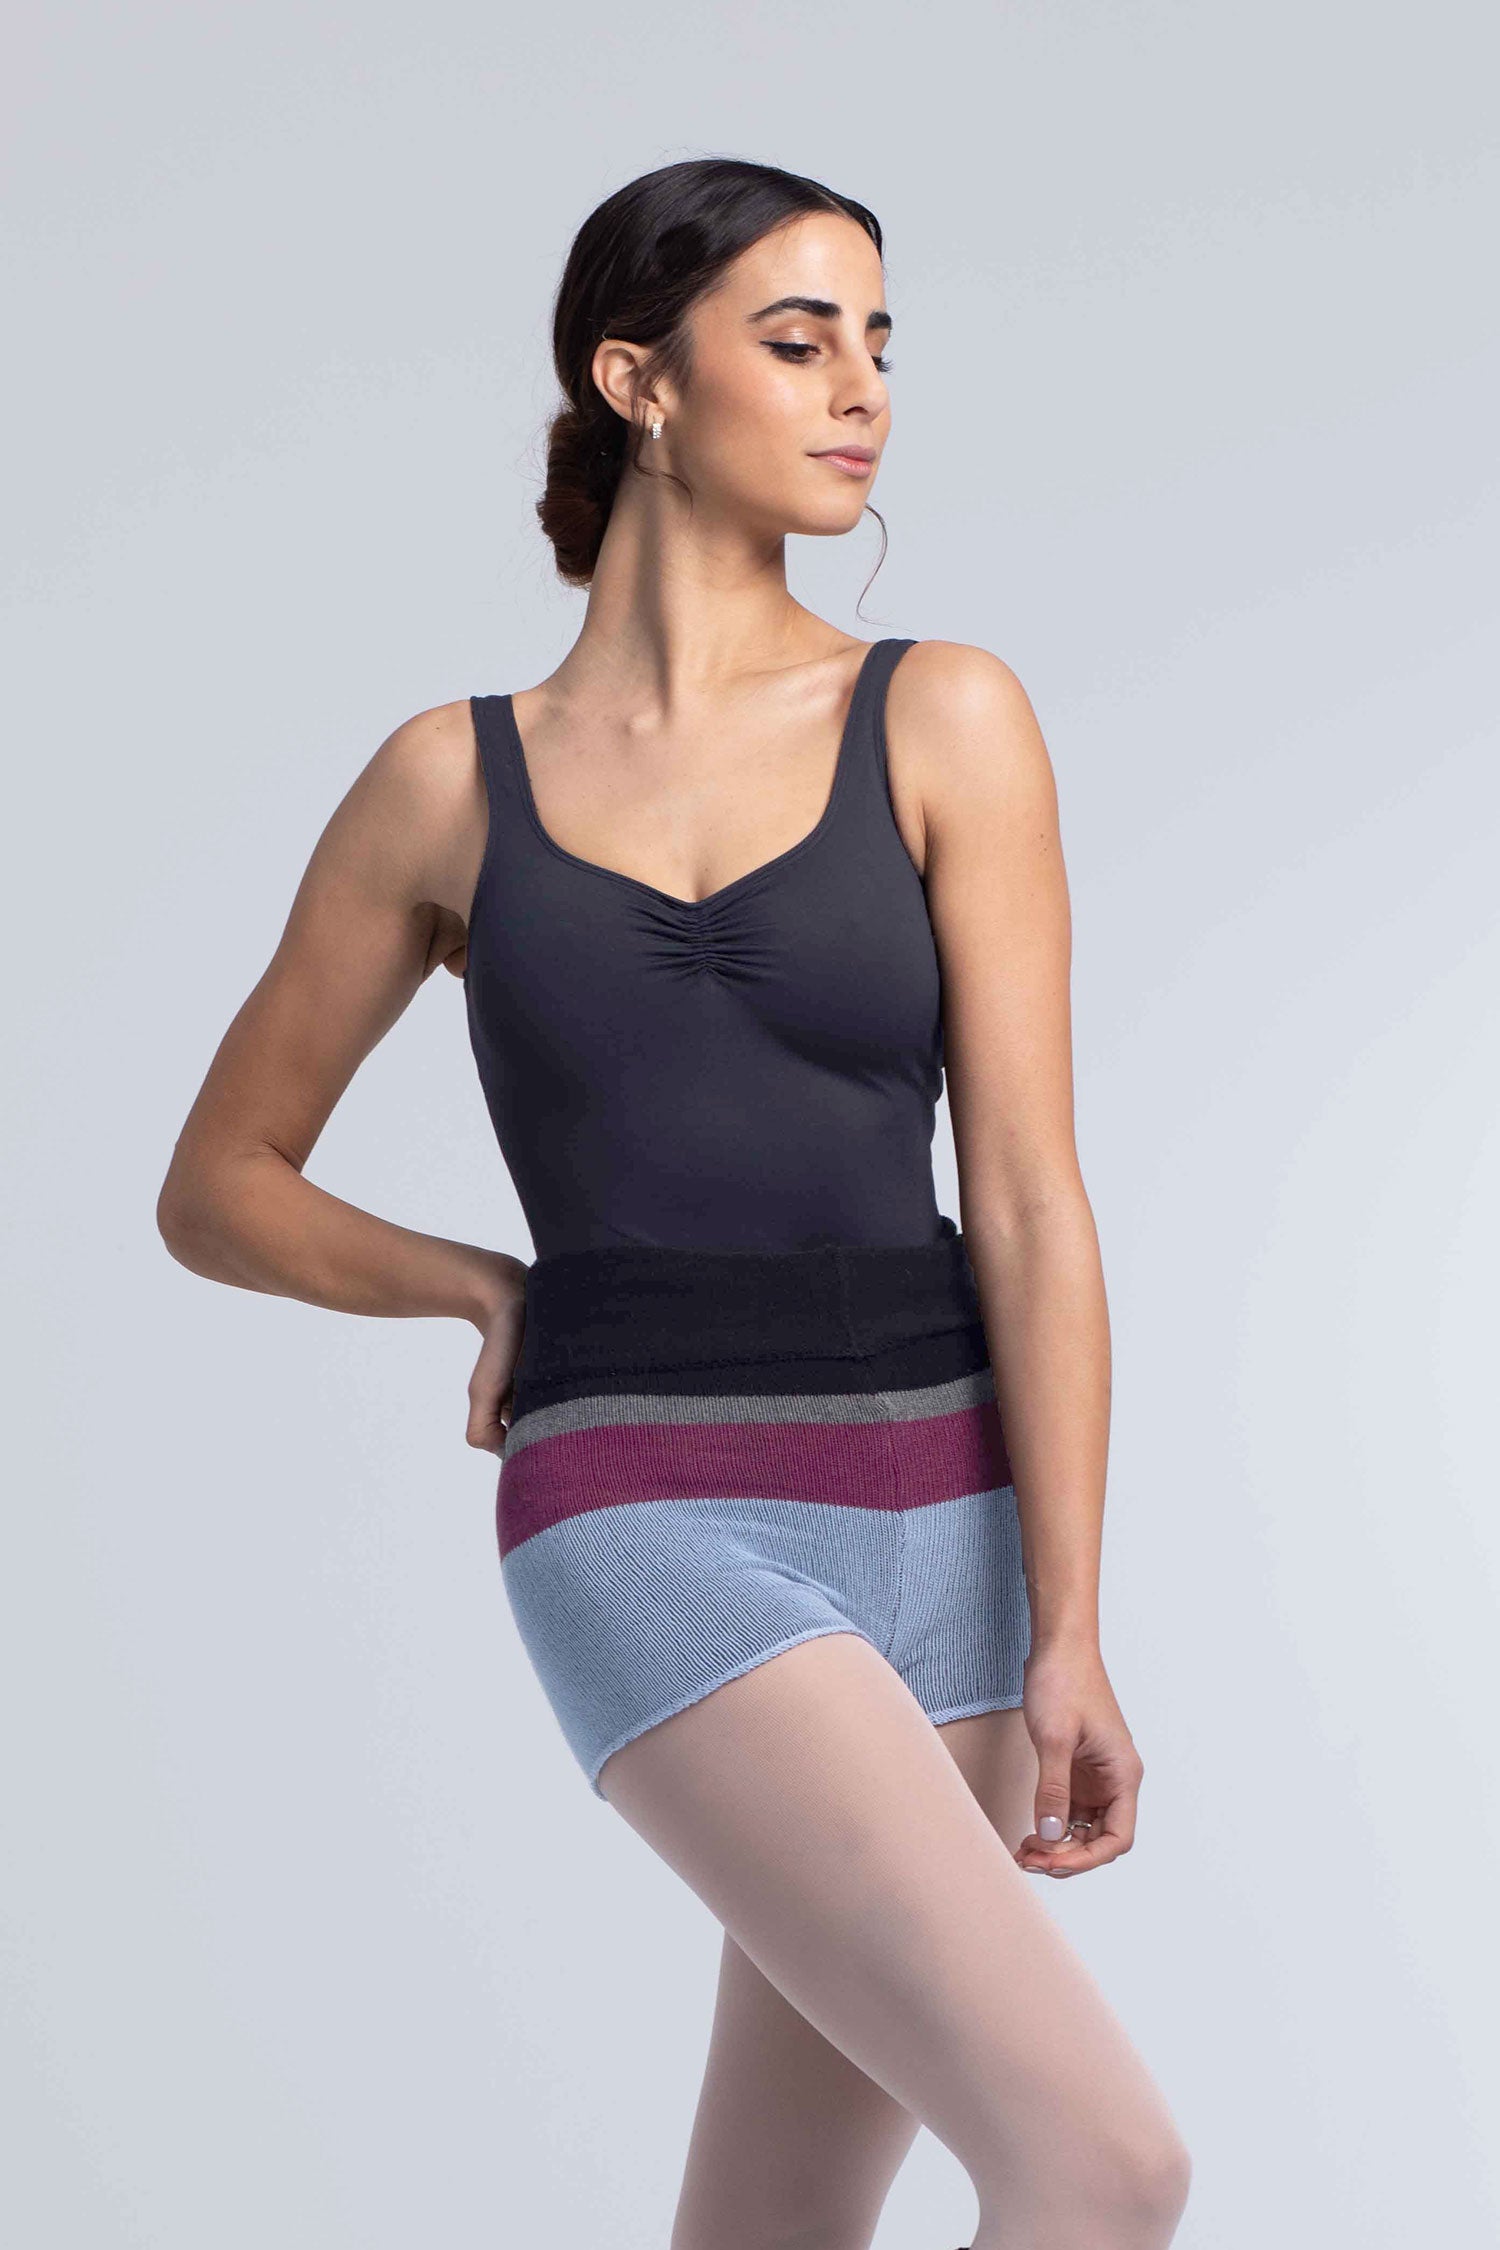 Intermezzo Panshortband Knitted Shorts - Black, Blue & Wine from The Collective Dancewear